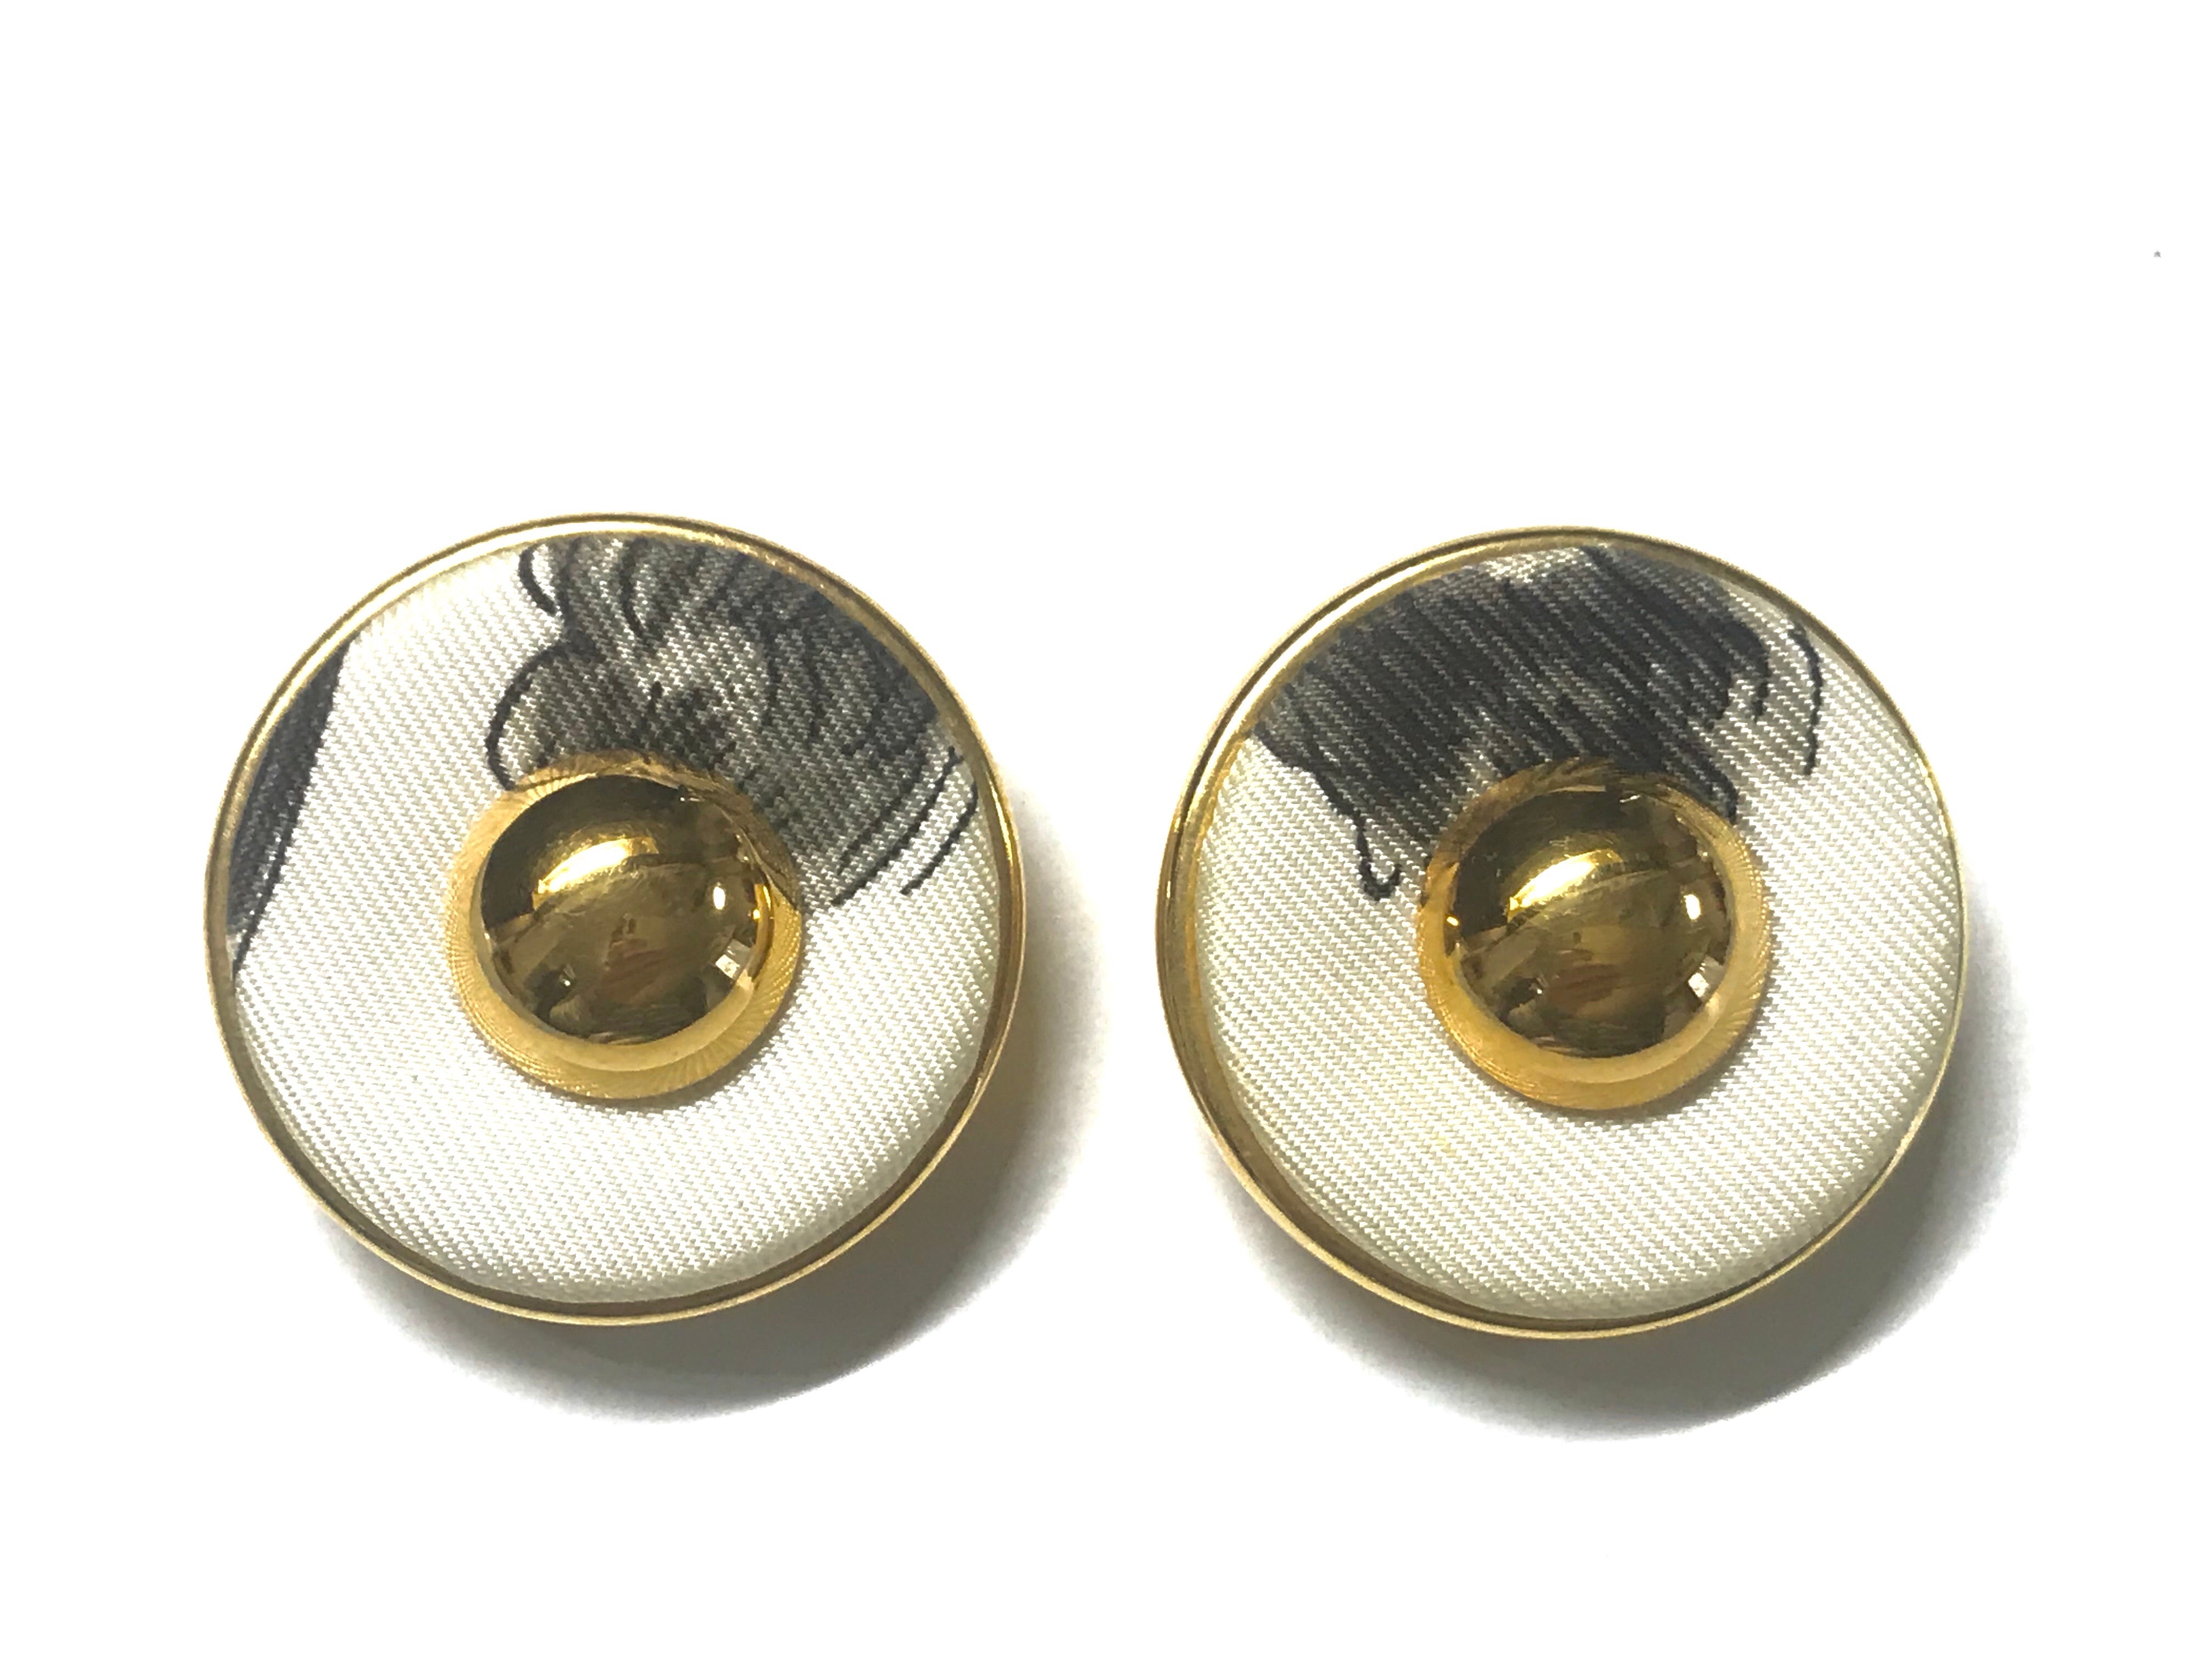 Vintage HERMES golden round earrings with white silk fabric frames. Classic jewel piece.